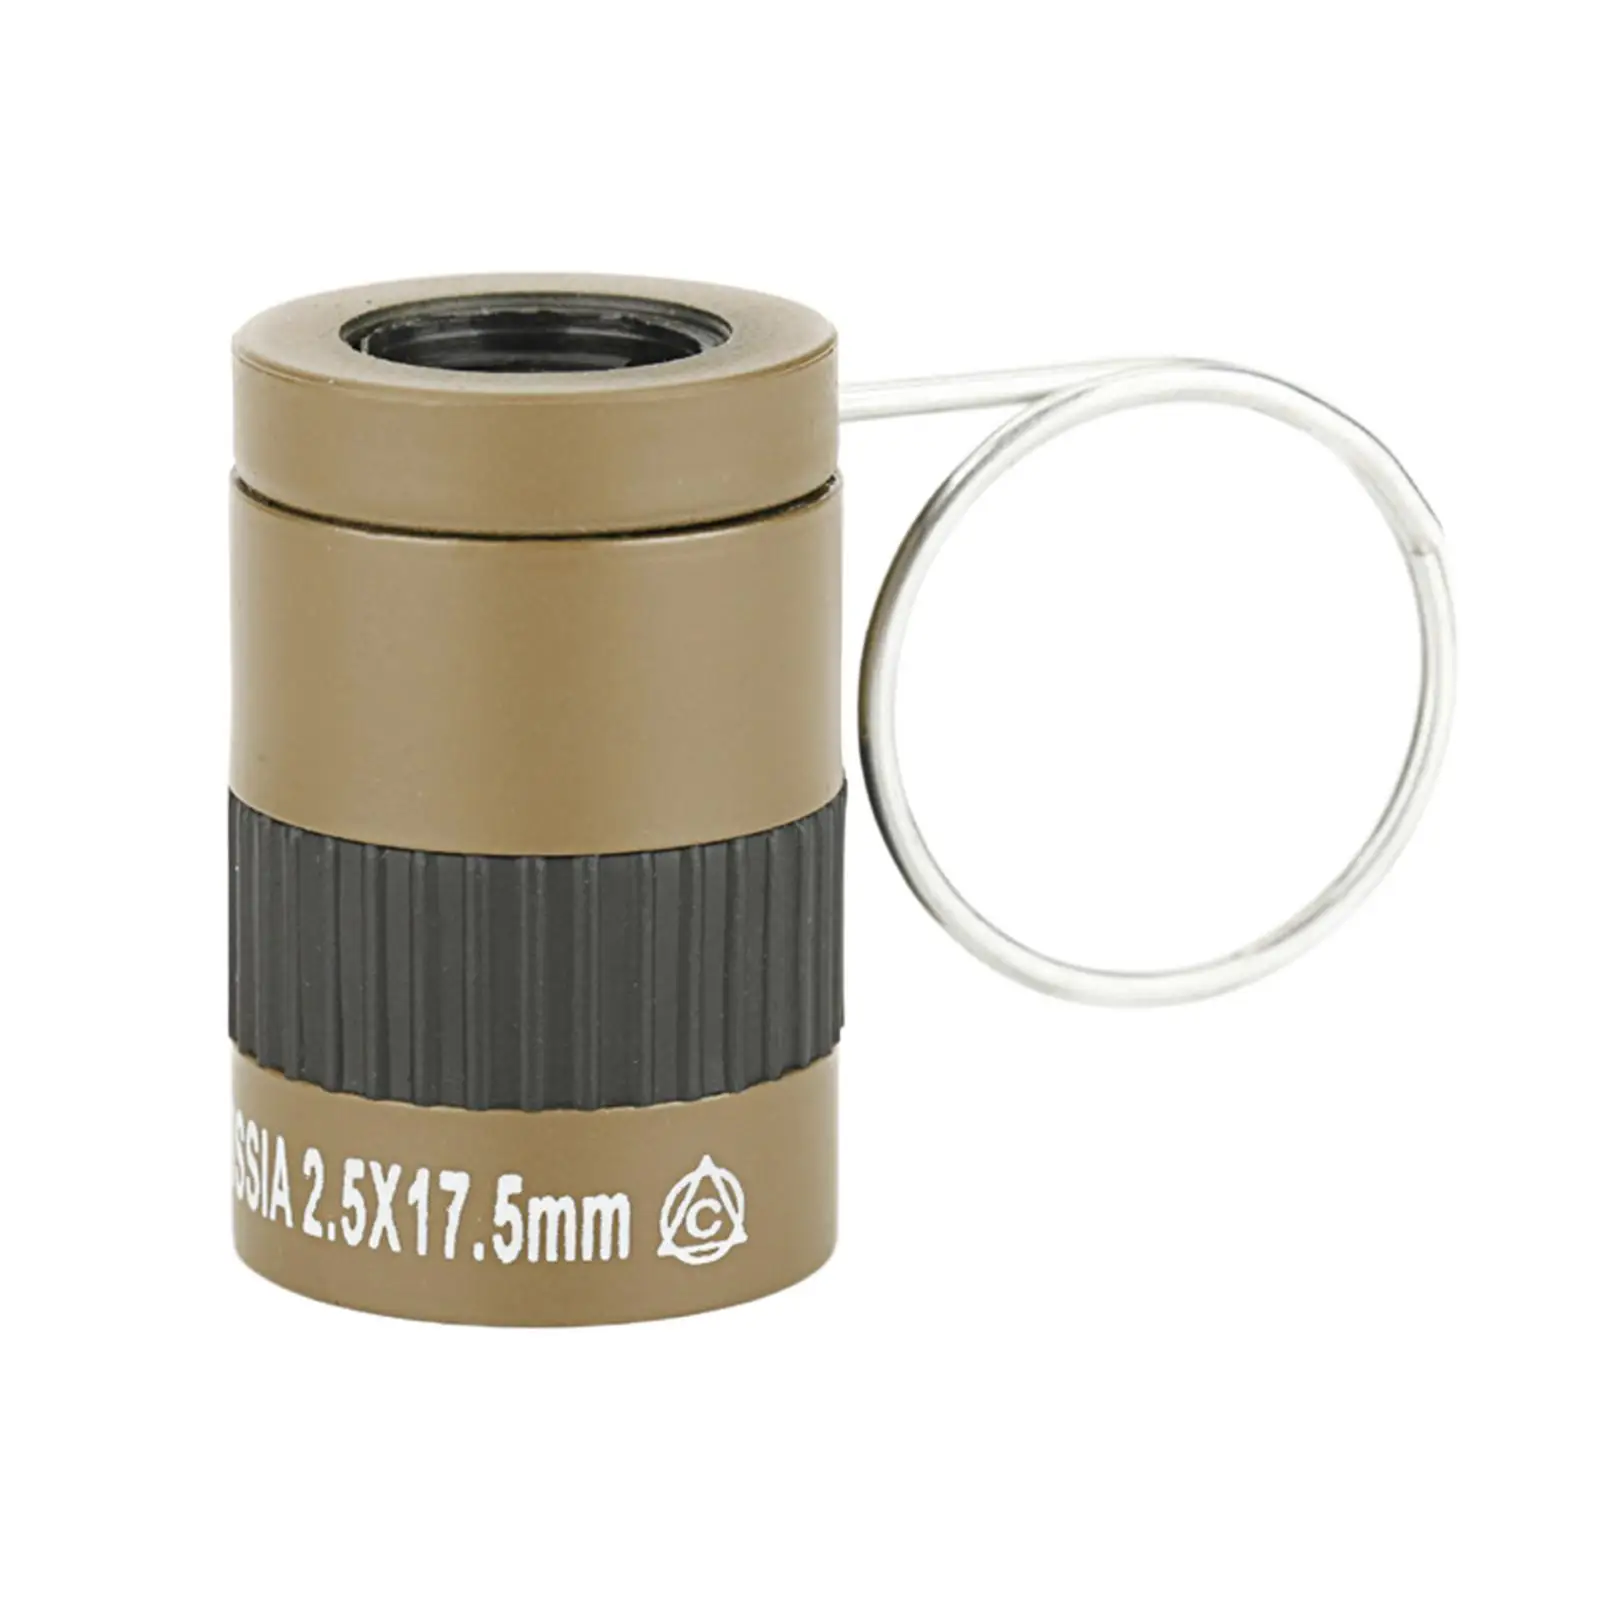 Mini Monocular Telescope 2.5x17.5mm Pocket Lens with Knuckle Finger Ring for Fishing Hunting Hiking Travel